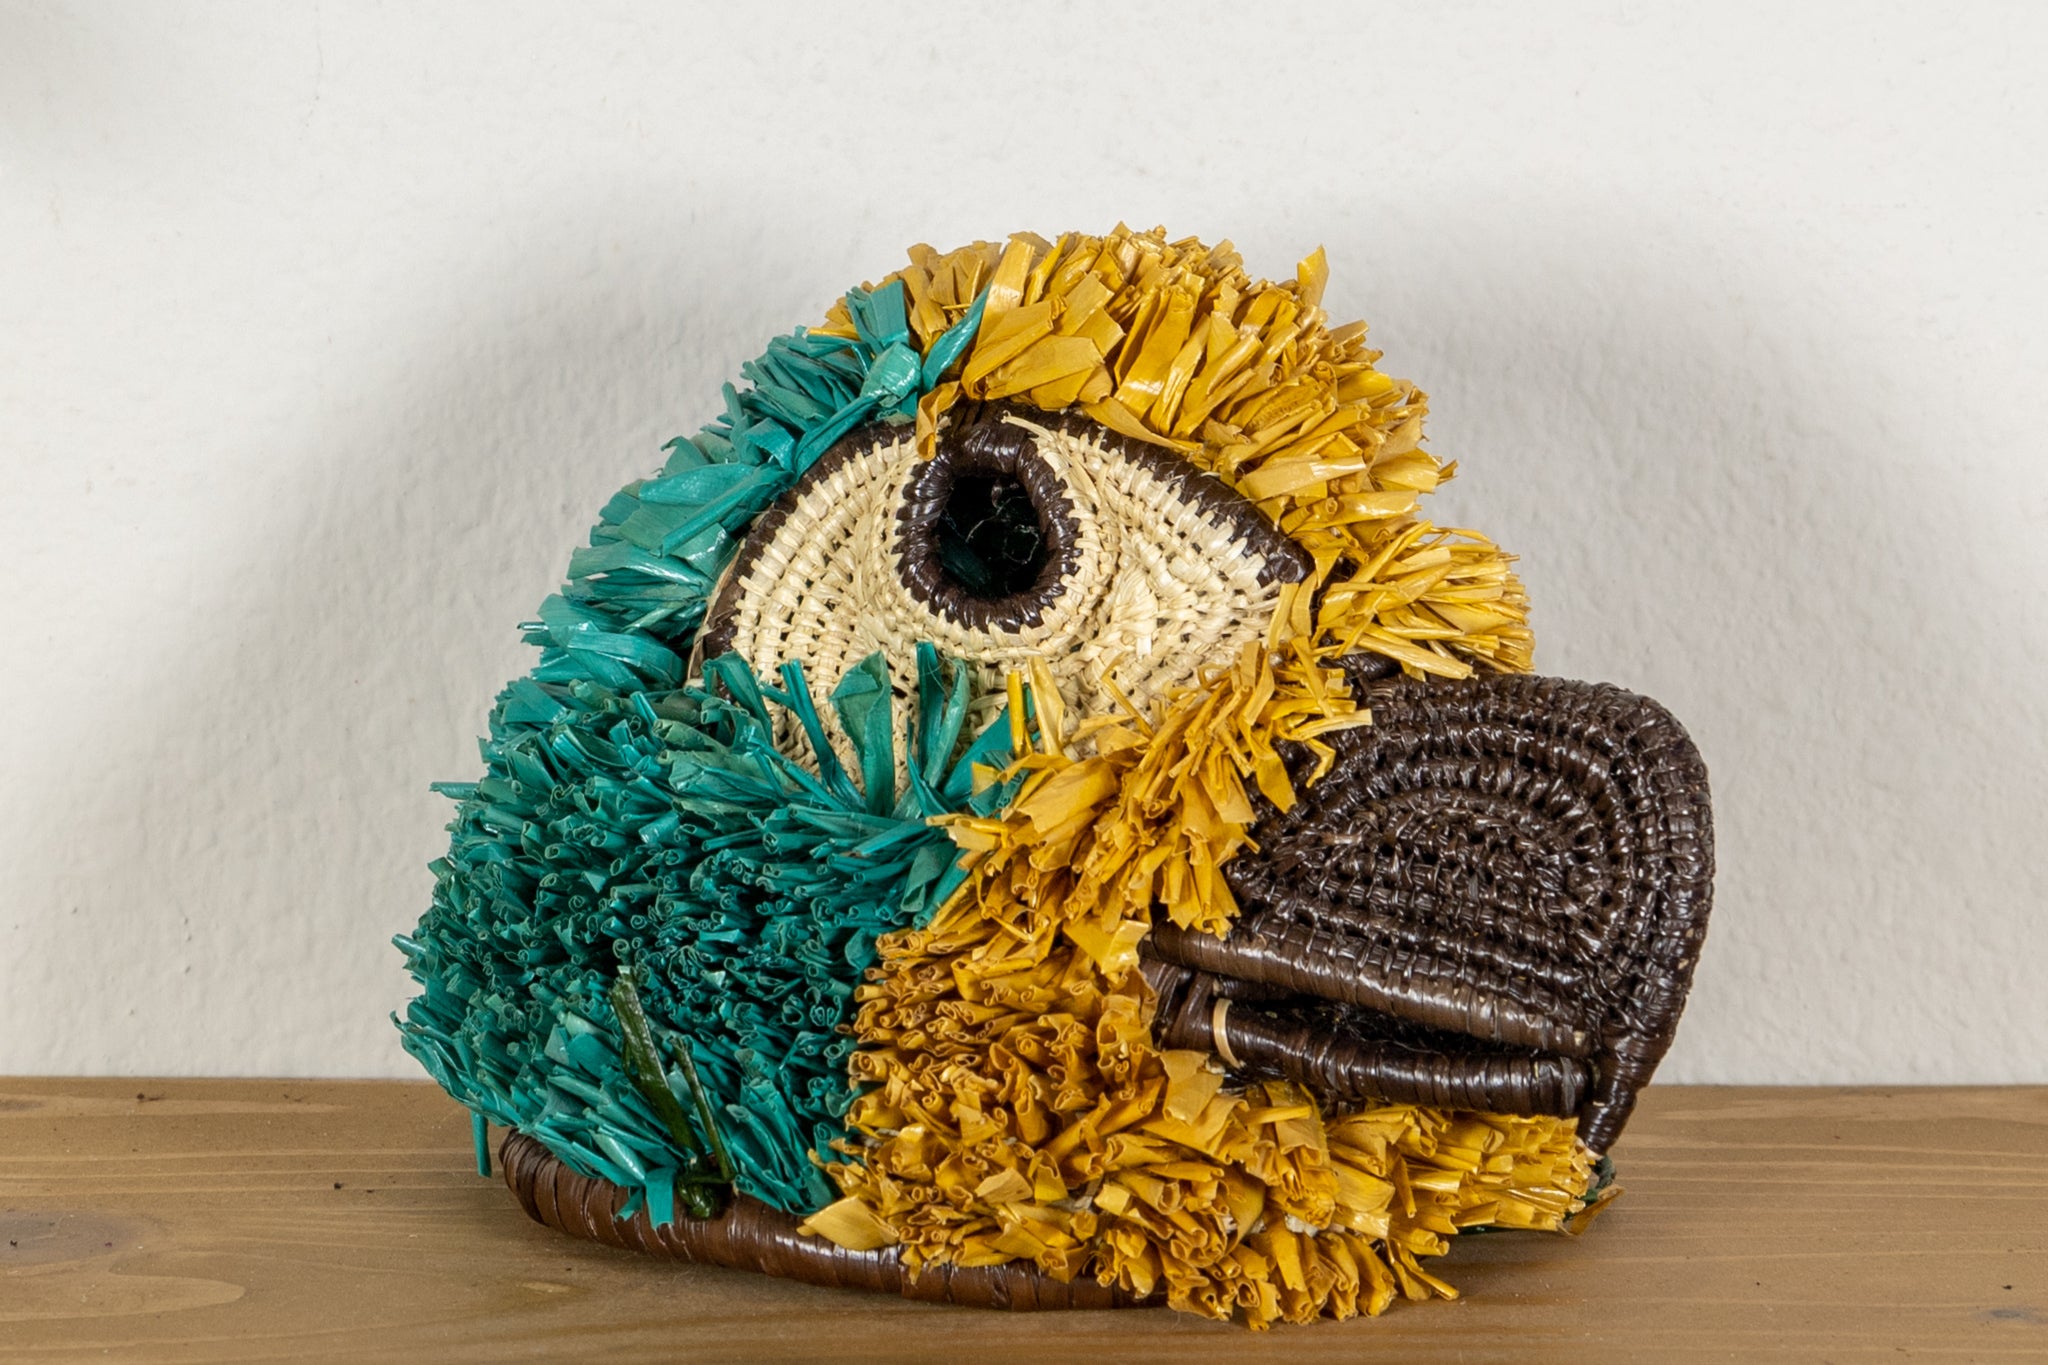 Teal and Yellow Macaw Mask